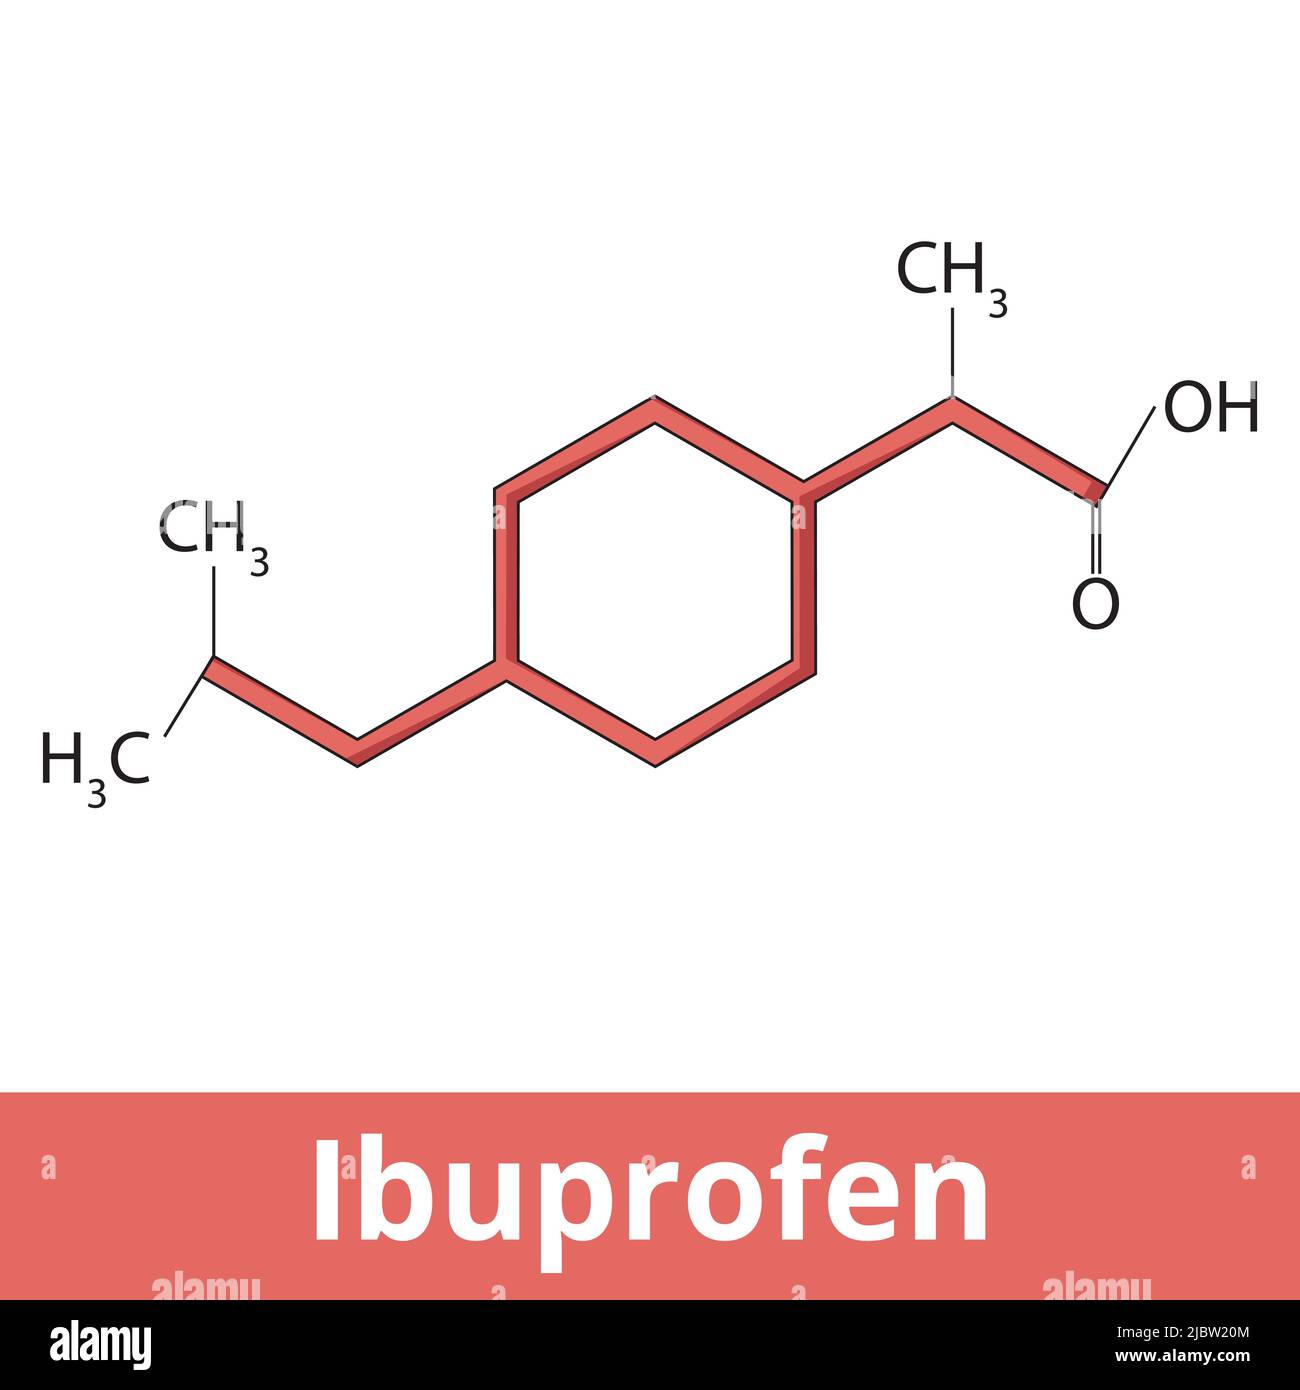 Chemical structure of ibuprofen. Ibuprofen is a medication in the nonsteroidal anti-inflammatory drug class that is used for treating pain, fever Stock Vector